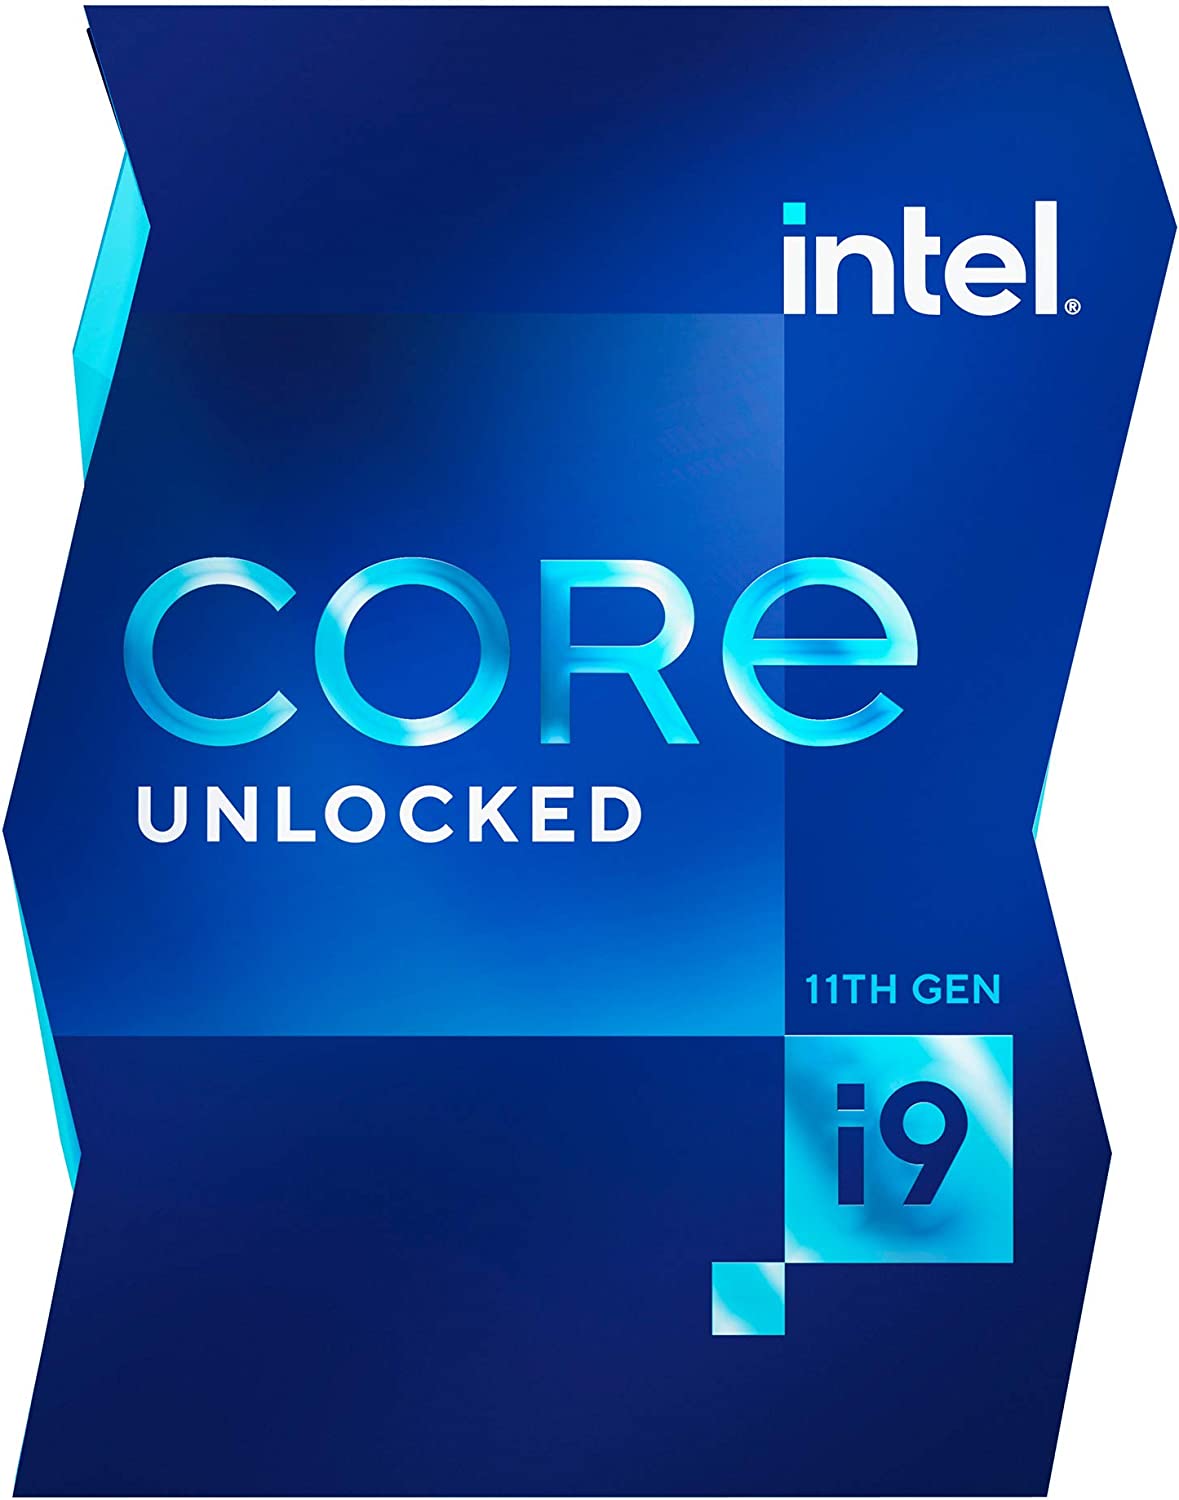 Intel Core i9-11900K Desktop Processor 8 Cores up to 5.3 GHz Unlocked LGA1200 (Intel 500 Series &amp; Select 400 Series Chipset) 125W CPU Only